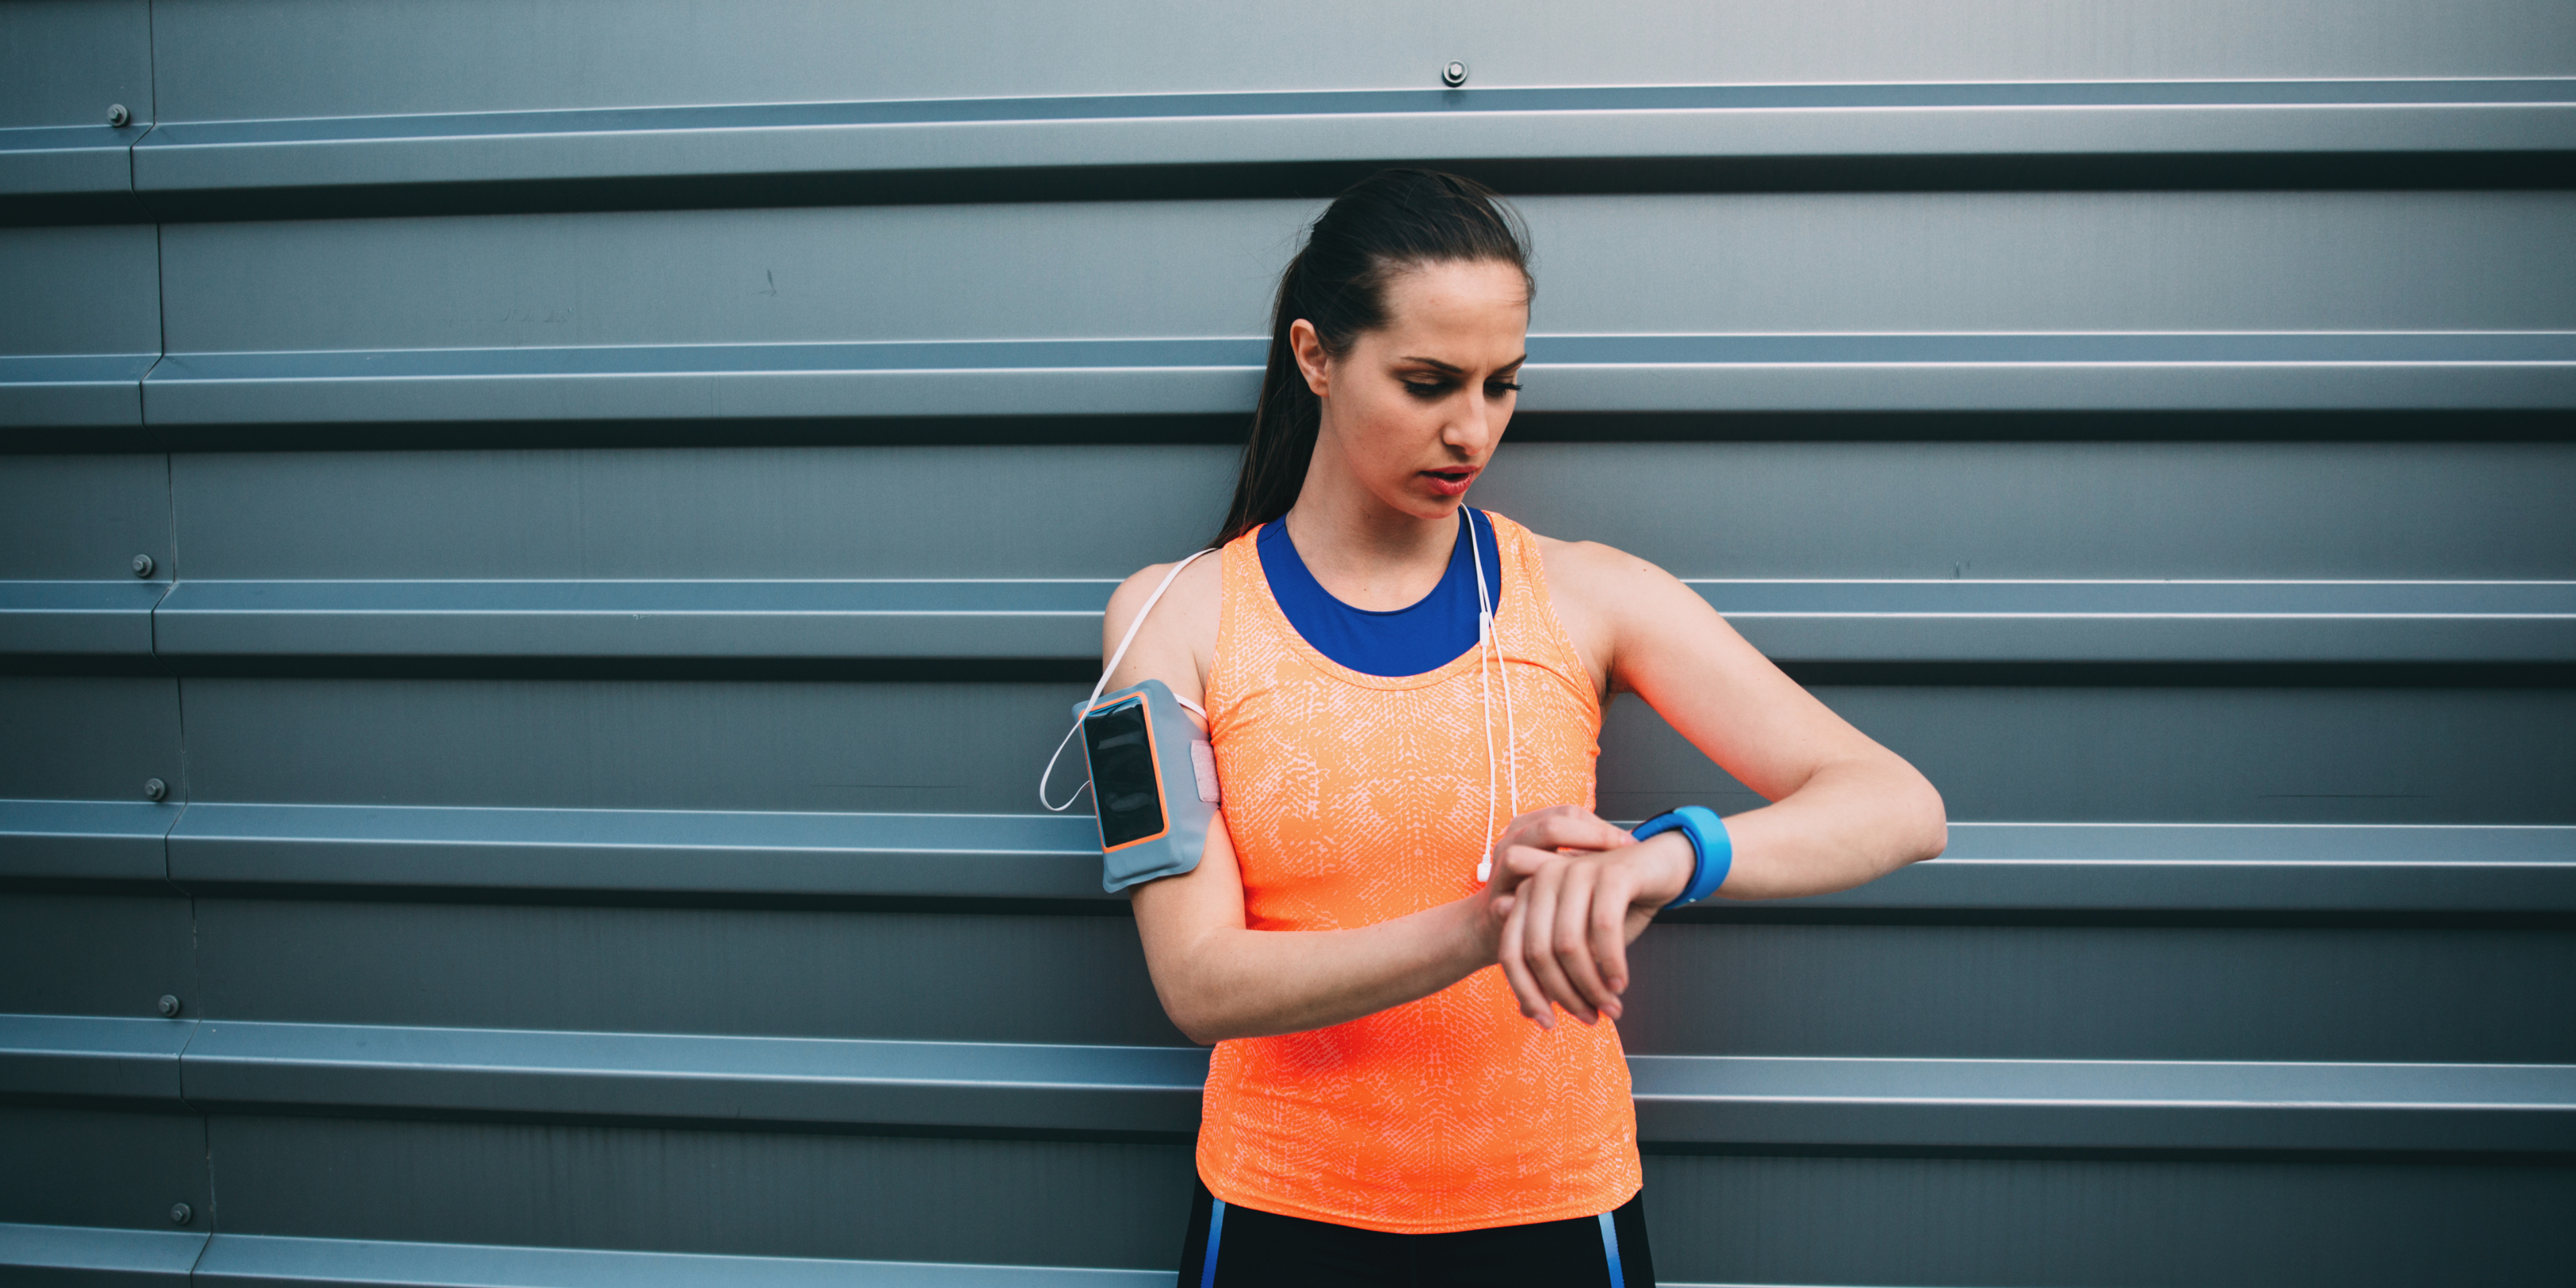 Female runner tracking her training to prevent overuse injuries.